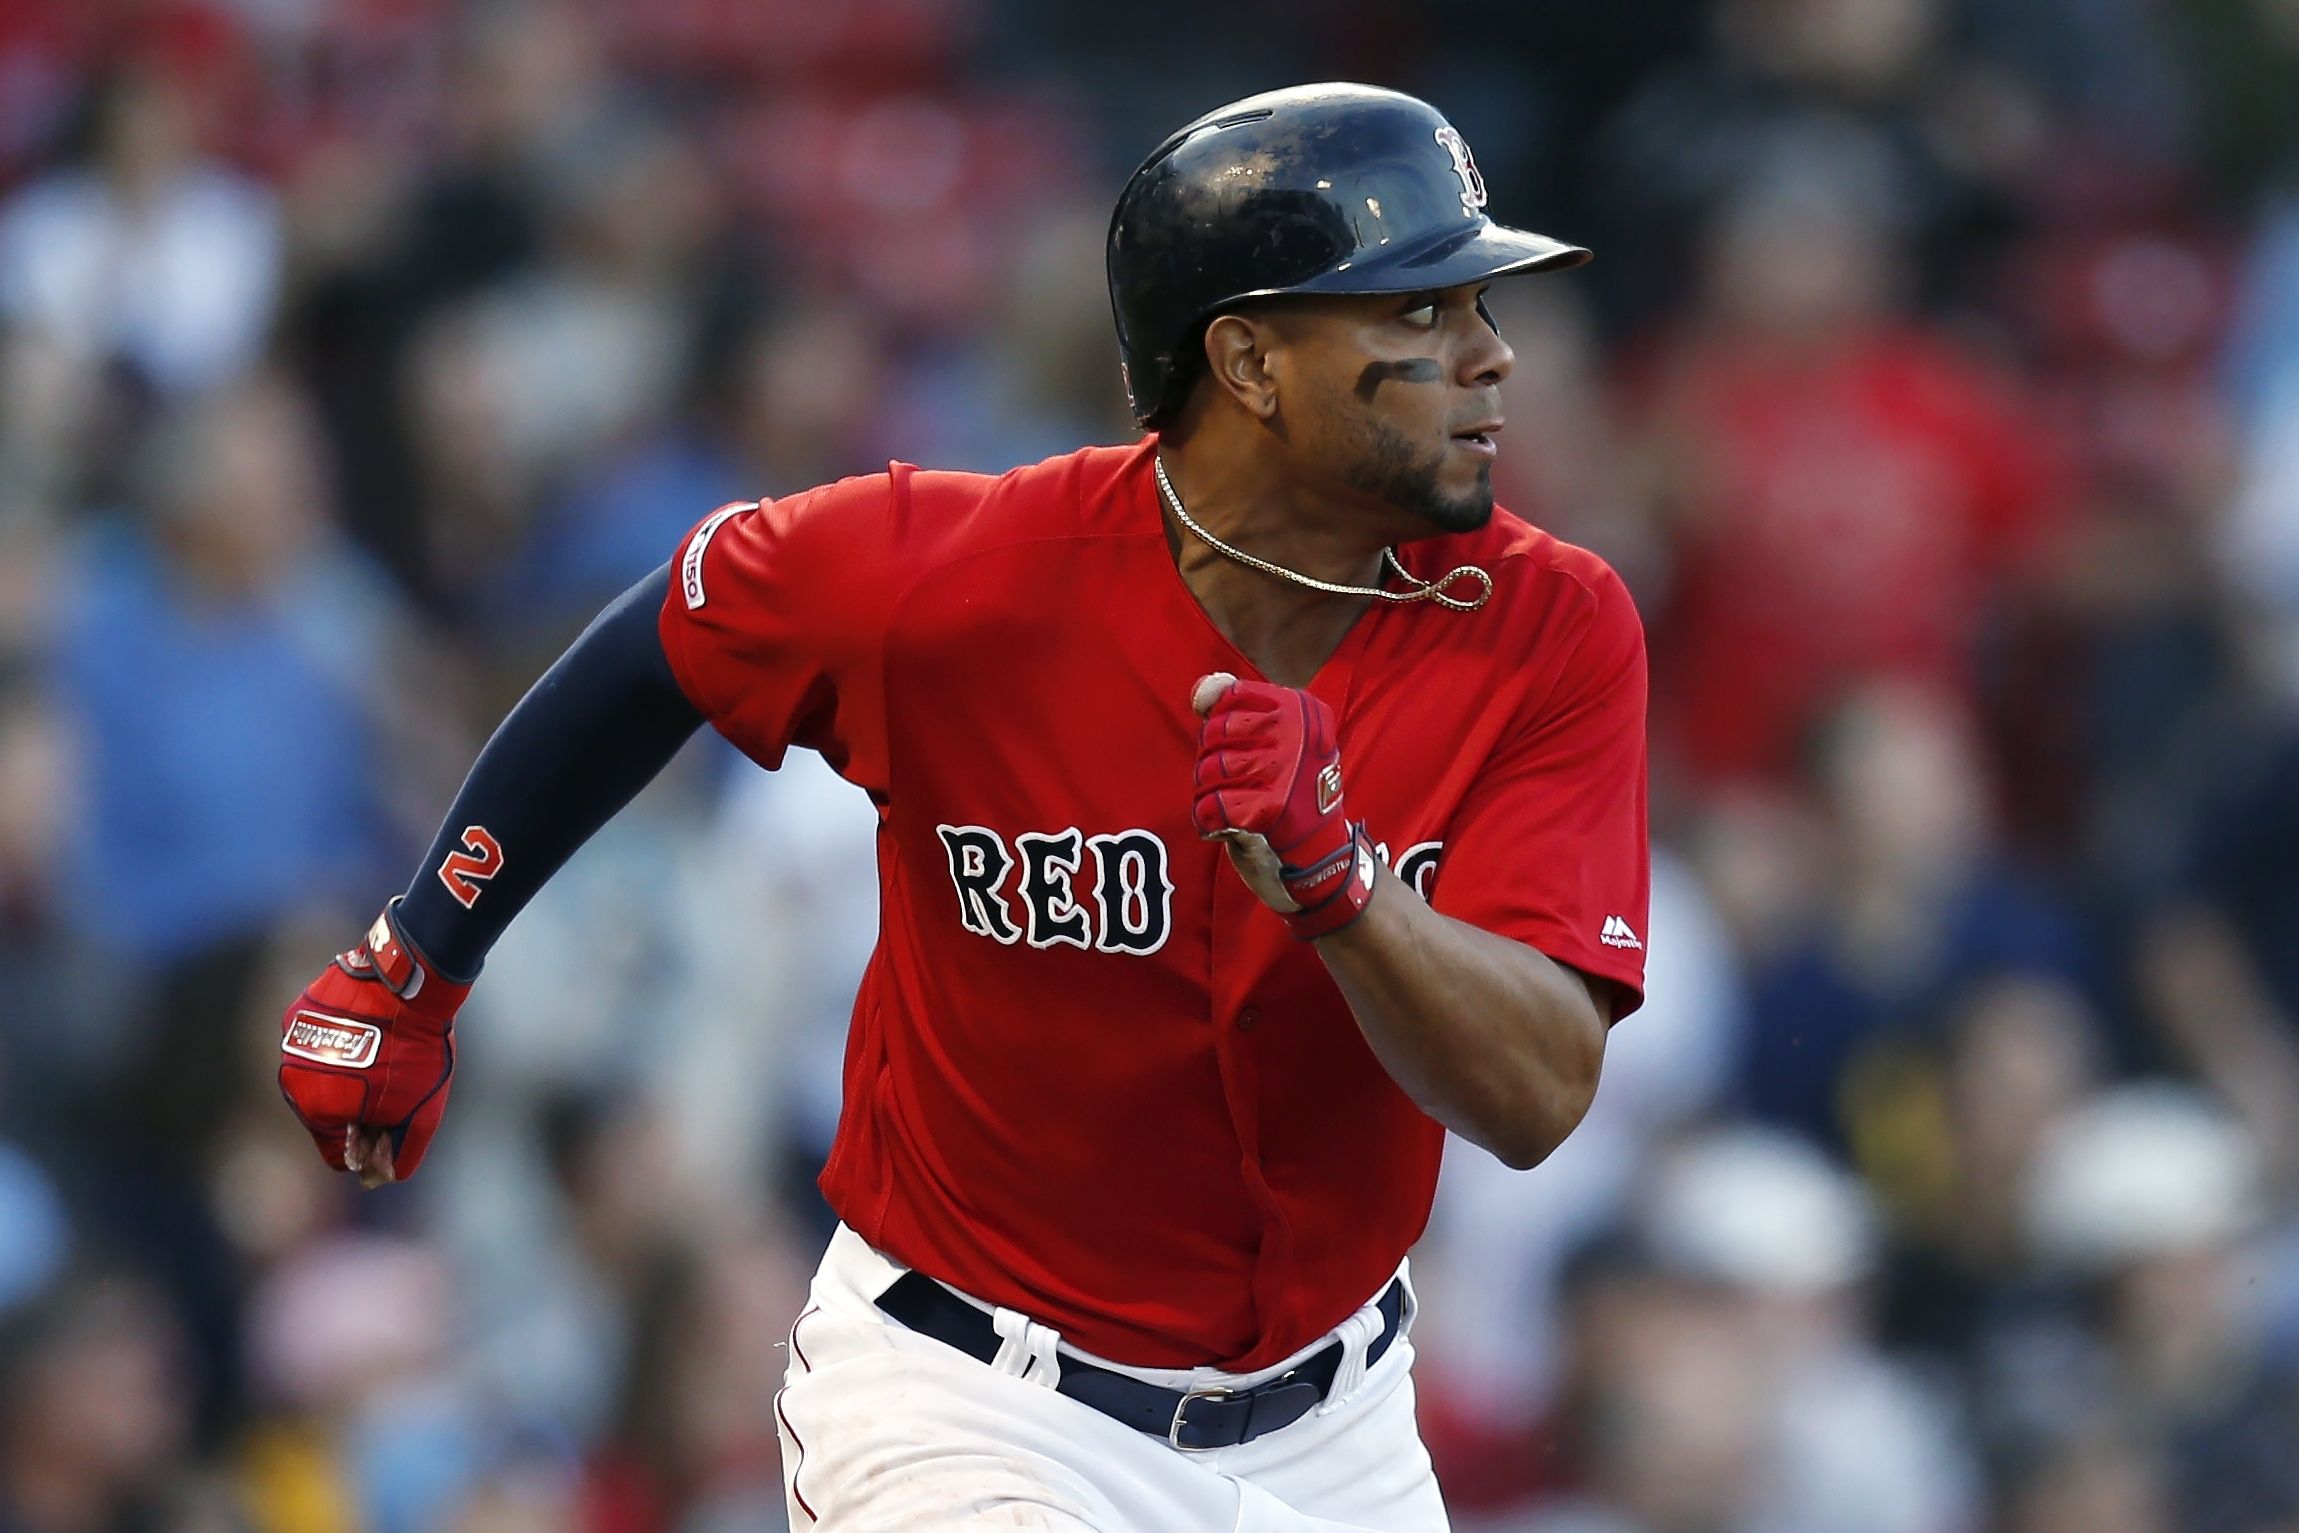 Boston Red Sox's Xander Bogaerts: 'We don't know if we're even